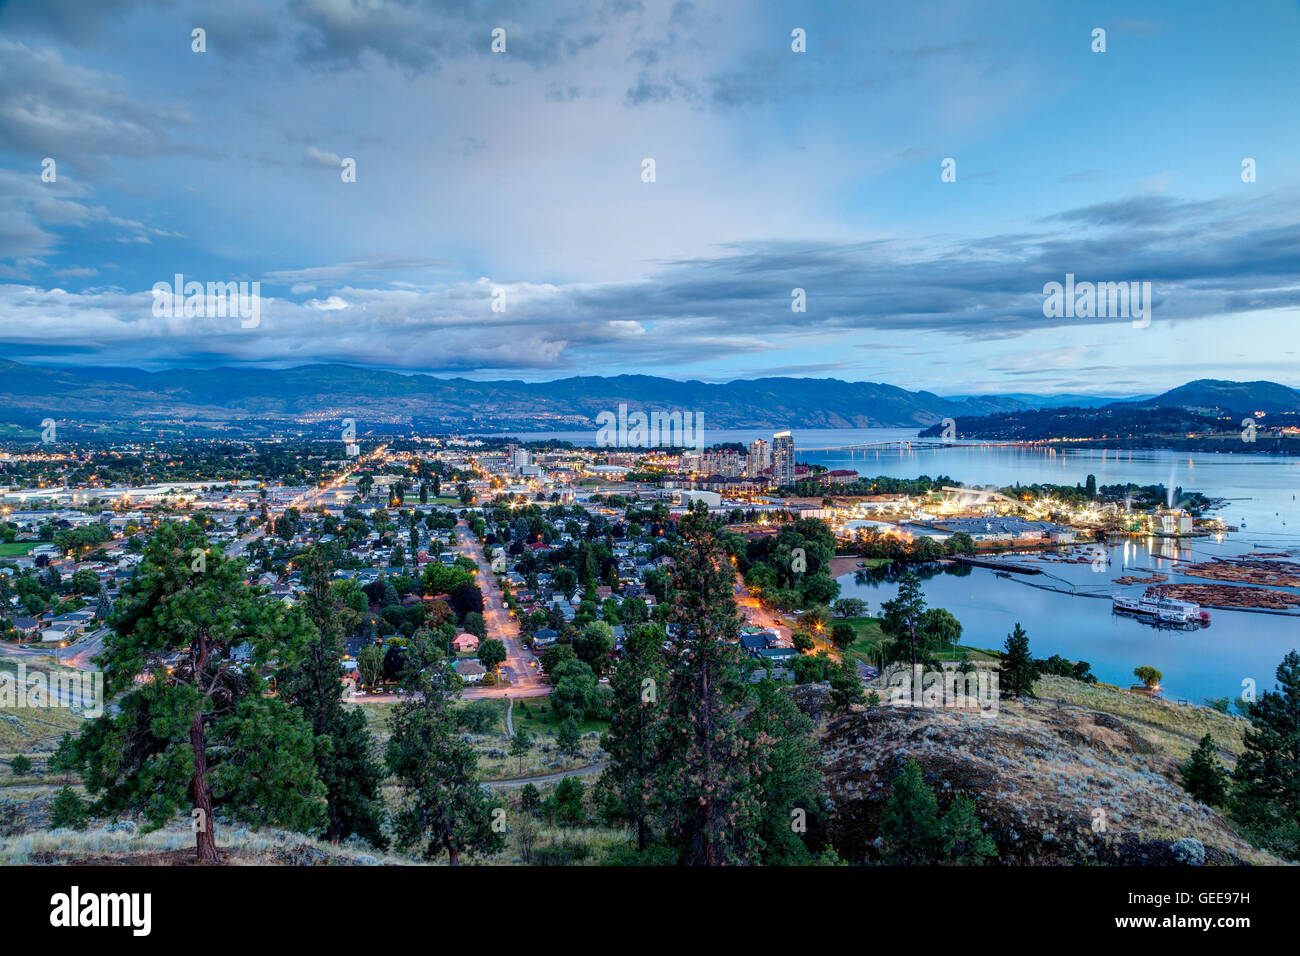 Aerial View of Kelowna, British Columbia, just after sunset on Knox Mountain, Canada. Stock Photo